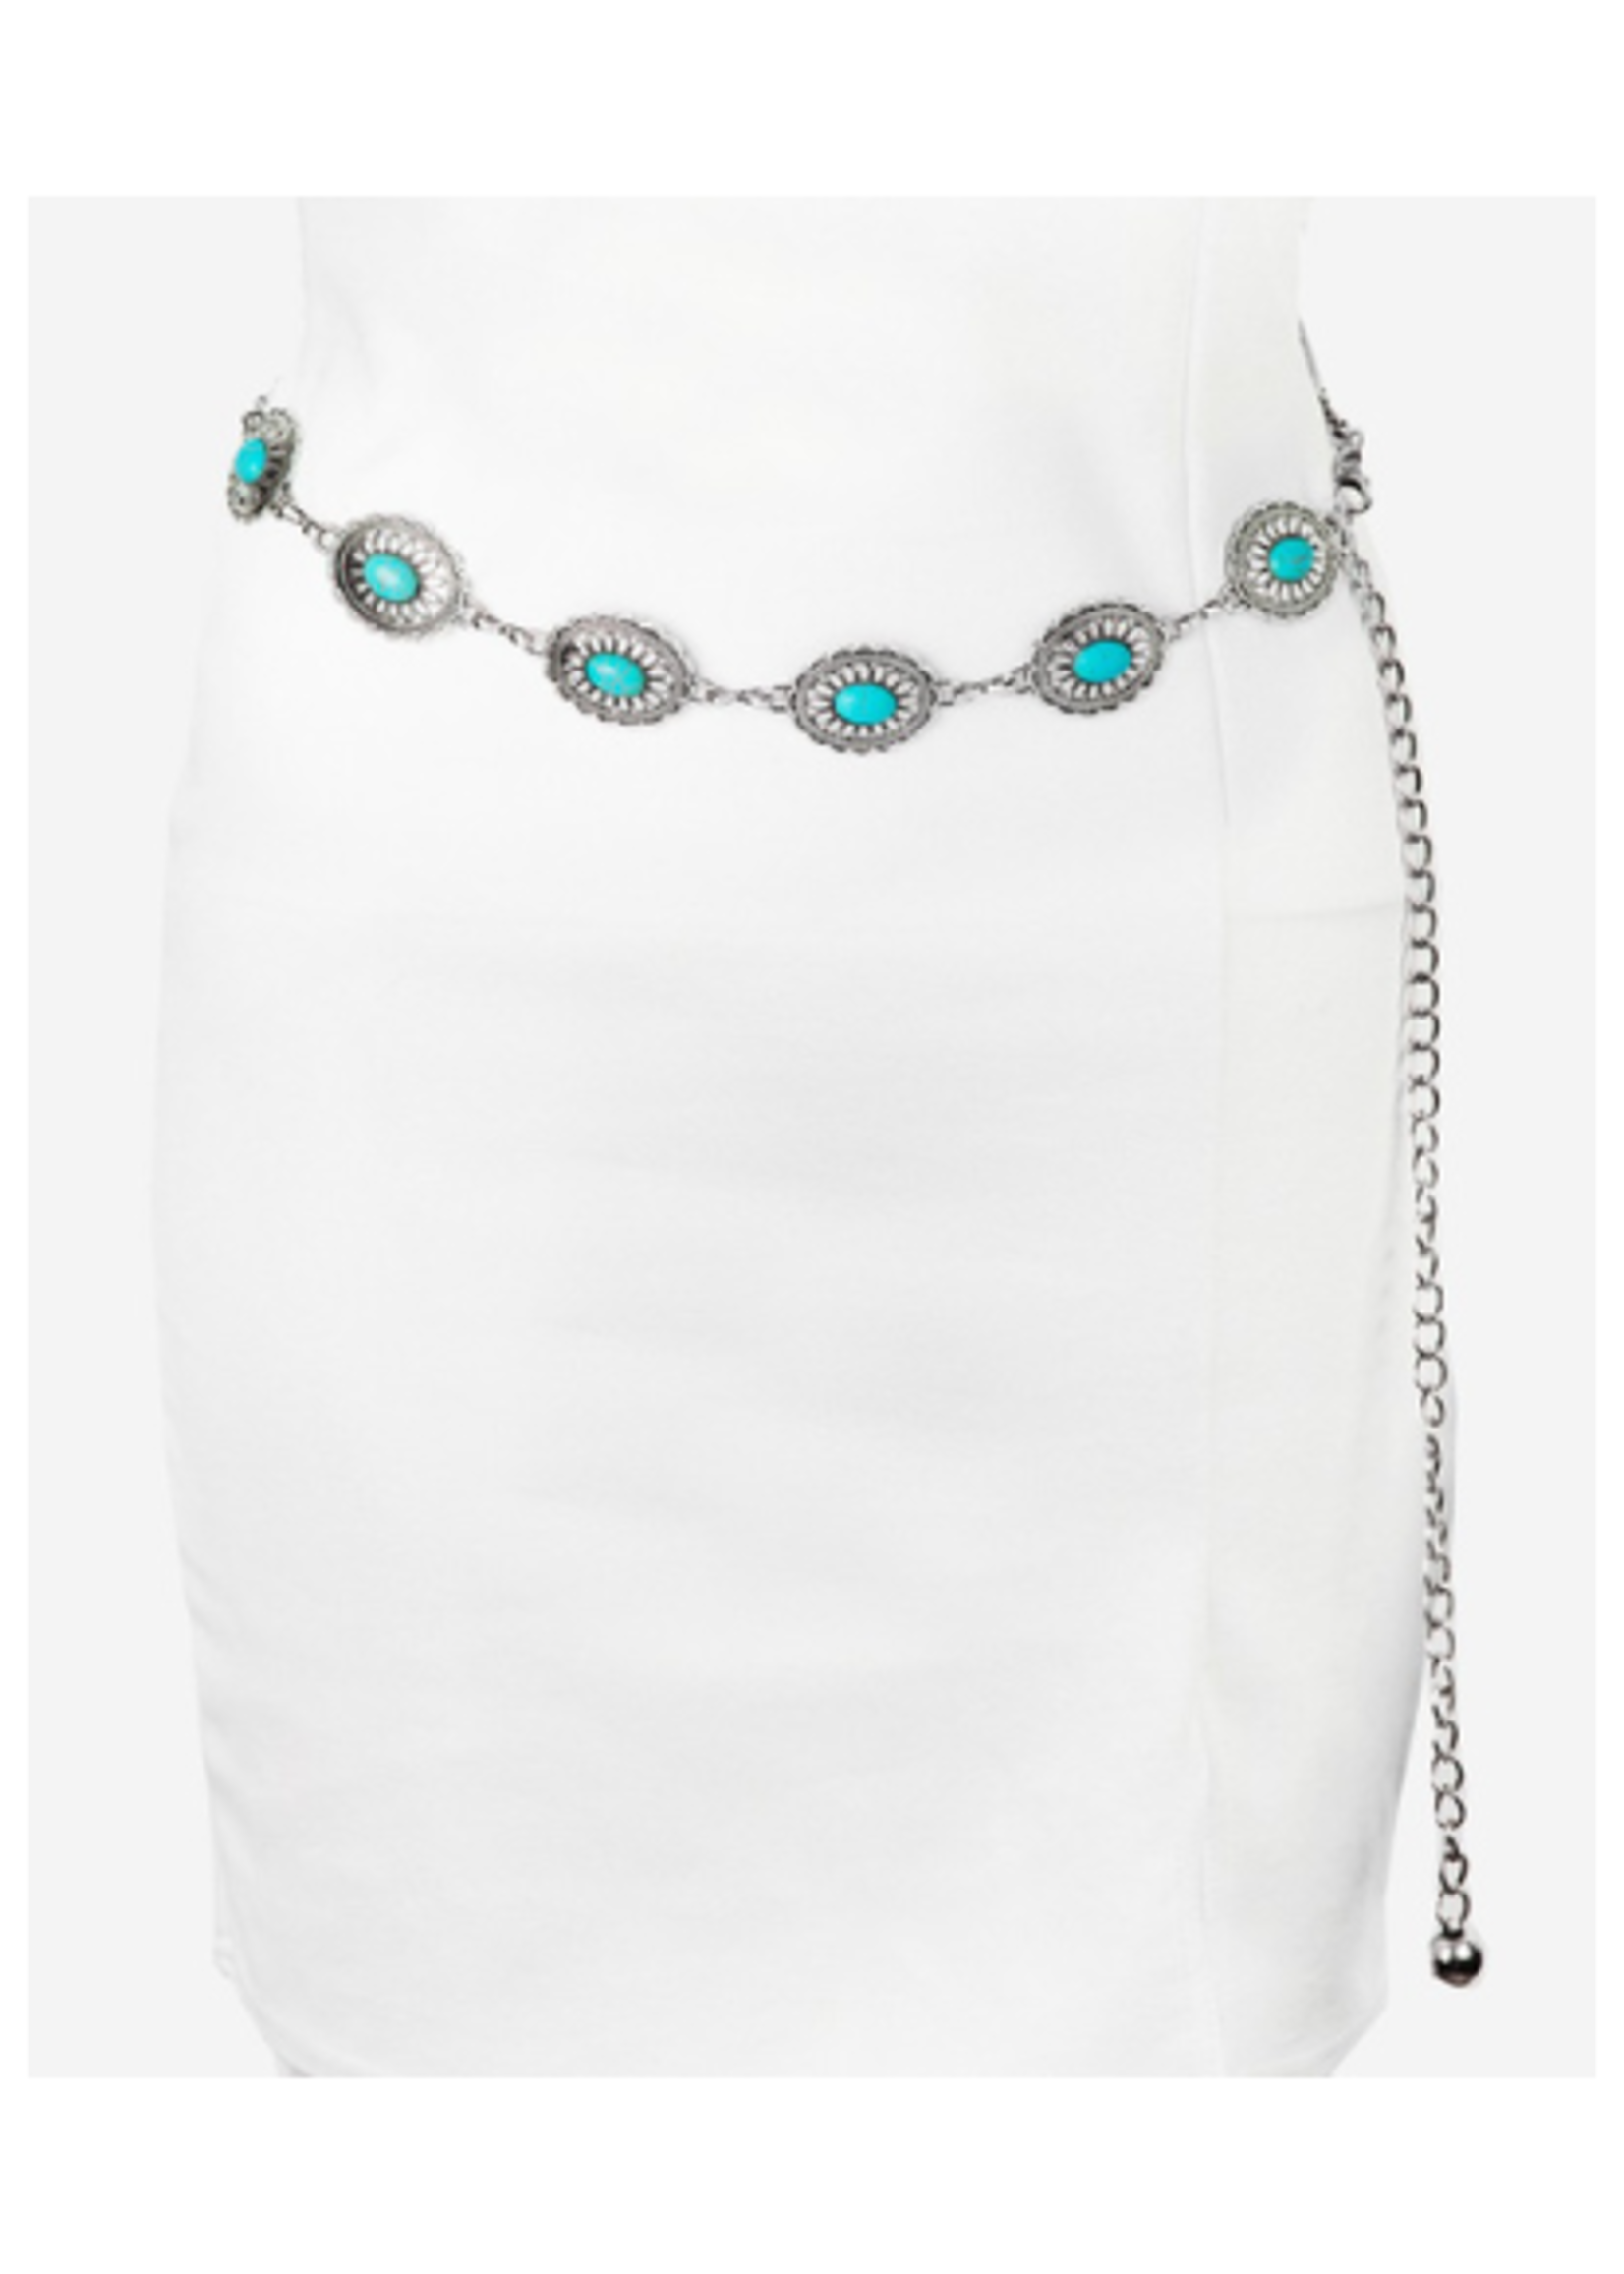 Floral Turquoise Concho Belt